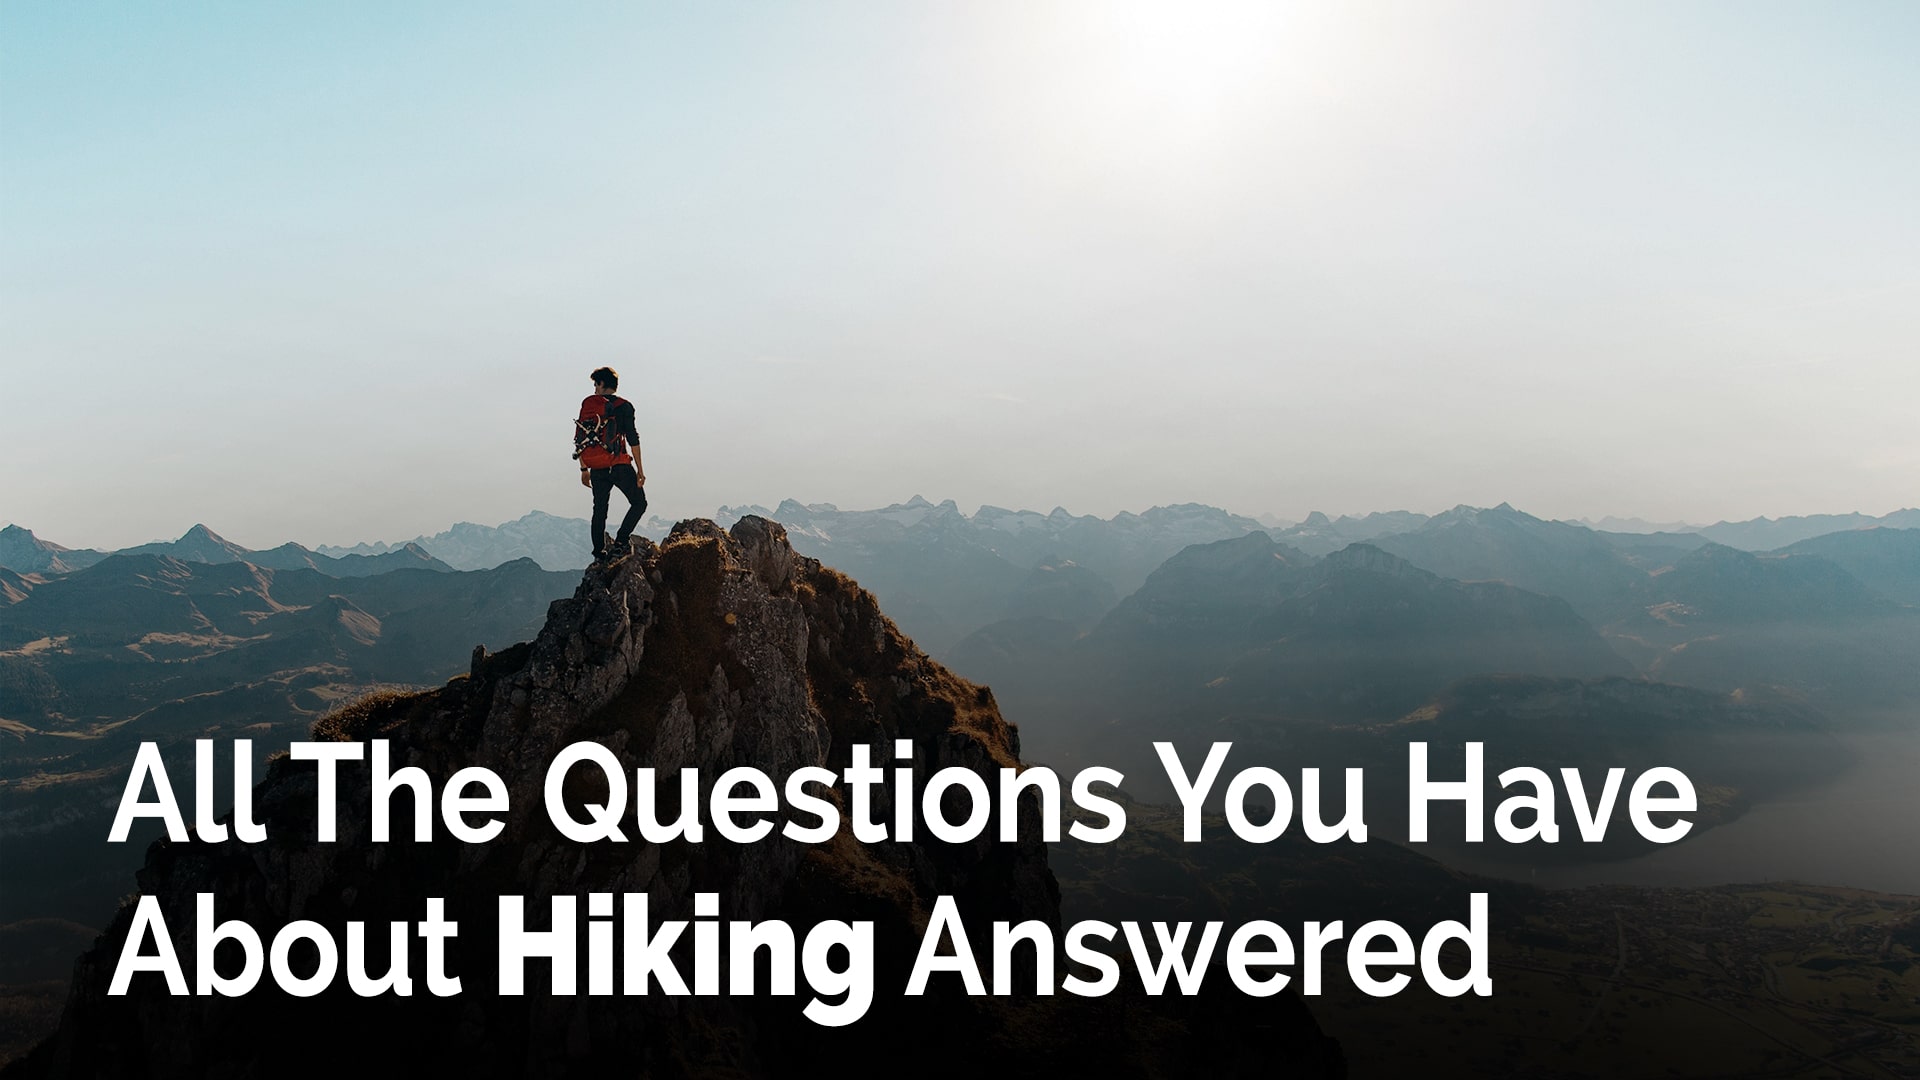 All The Questions You Have About Hiking Answered